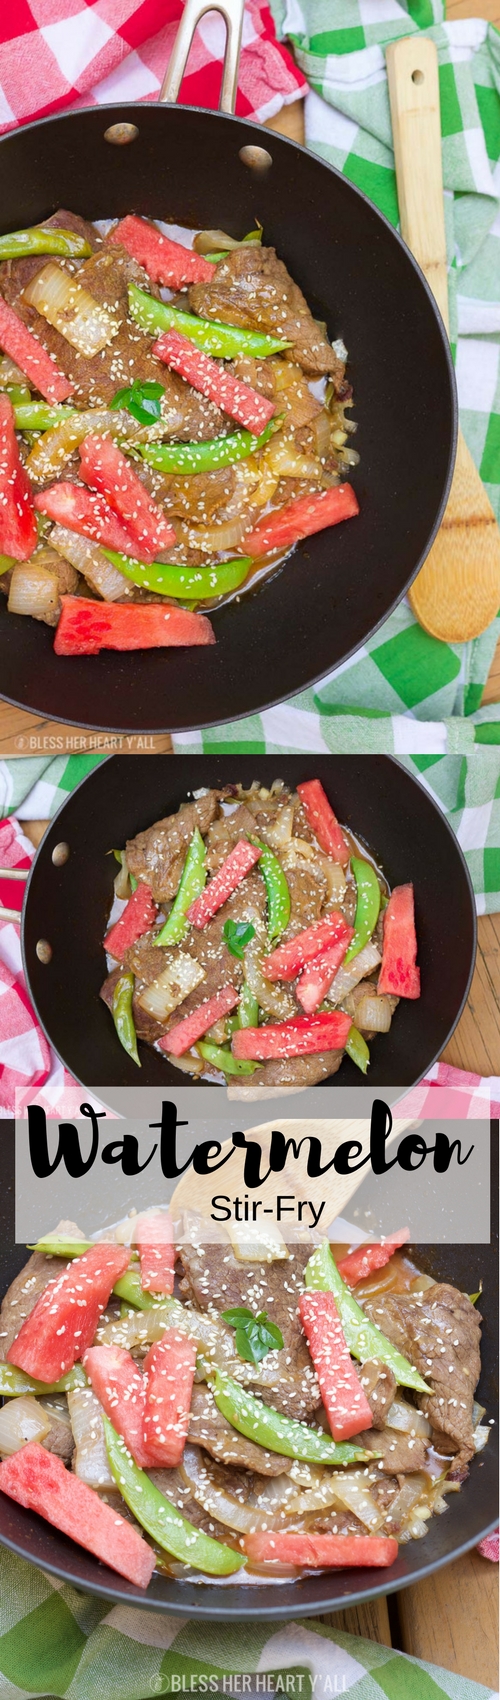 This simple watermelon stir-fry recipe combines the sweet refreshing flavors of juicy ripe watermelon with the savoury flavors of the asian-inspired stir-fry! The perfect-for-summer sauce has just a touch of sweet and light with it's combination of fresh lime juice and garlic. This summer dish definitely won't weigh you down in the sizzling heat!